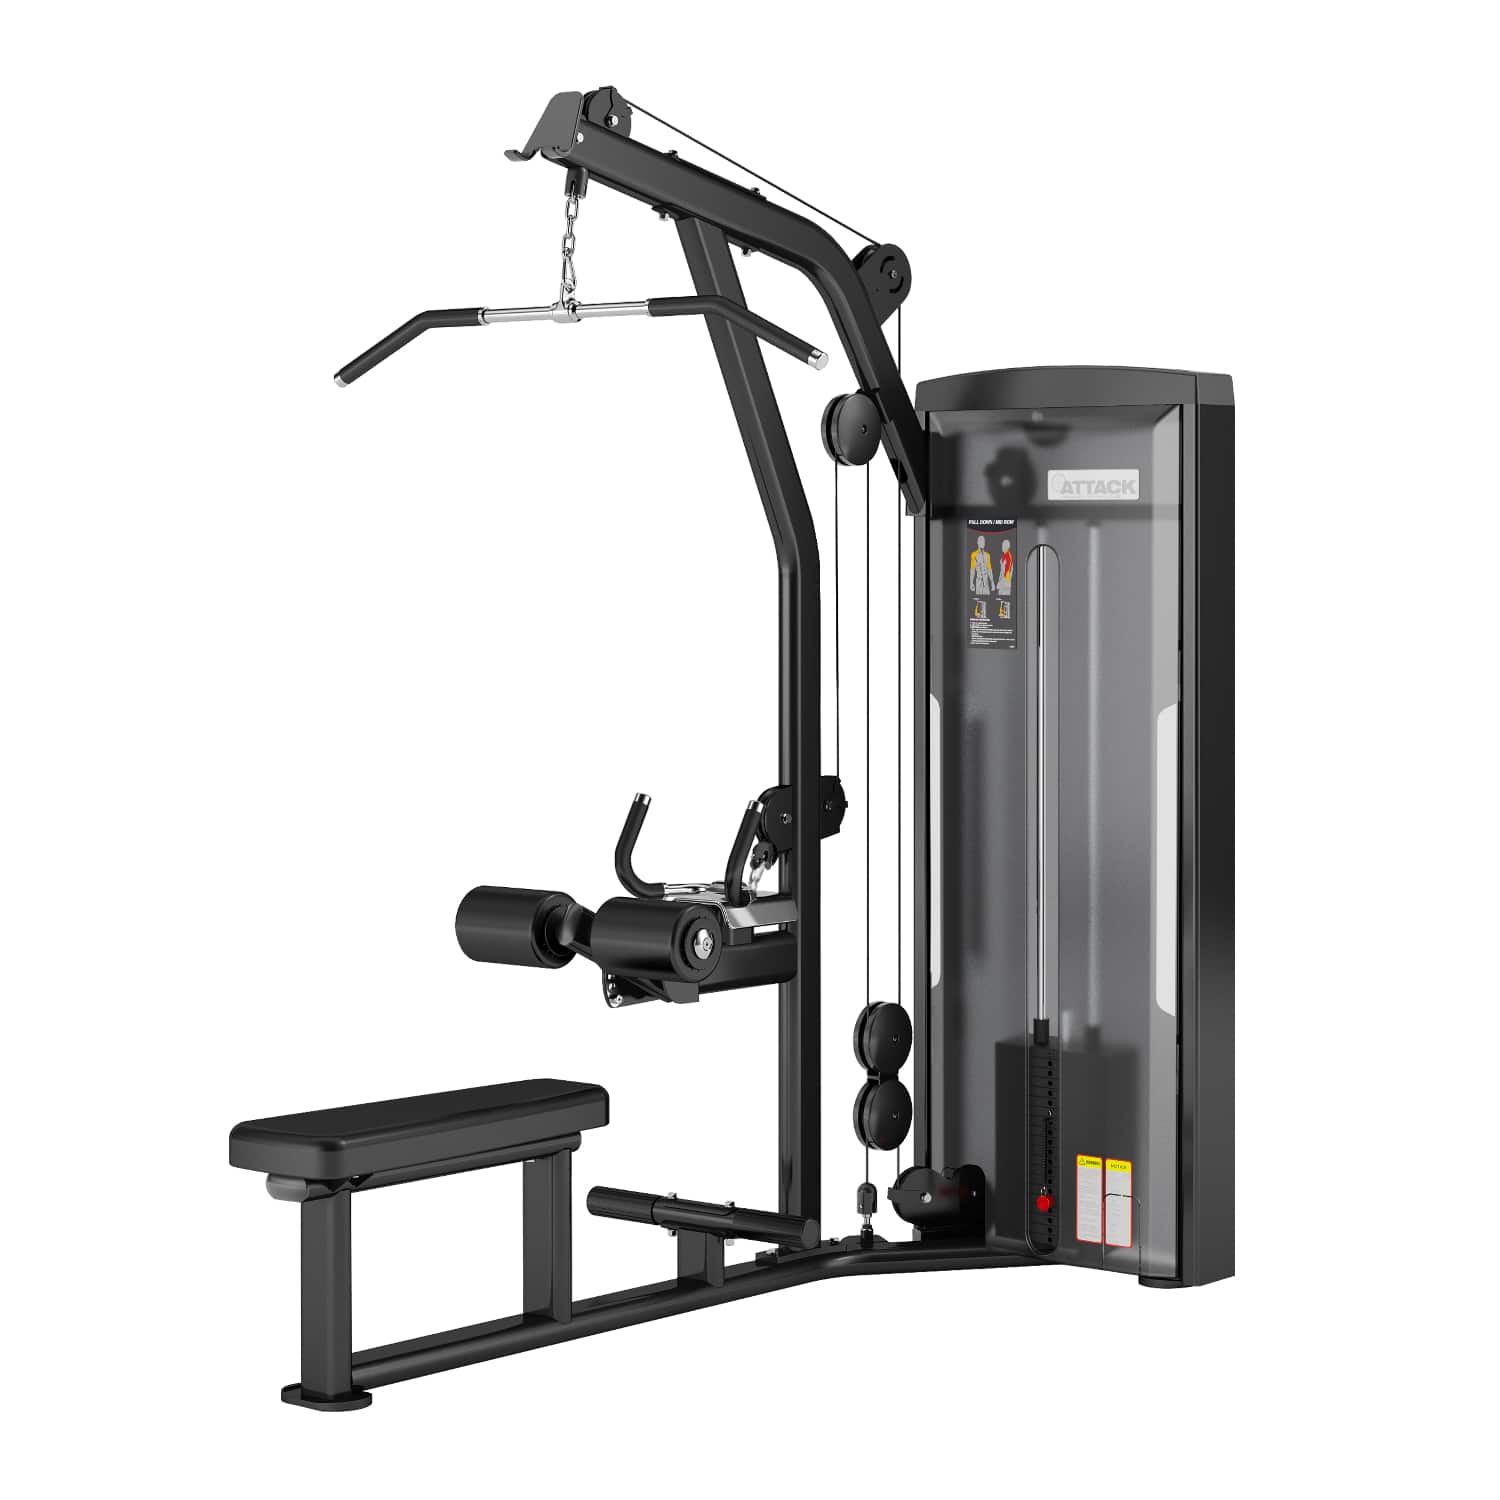 Attack Fitness - Lat Pulldown / Low Row Dual Machine - Wharf Fitness